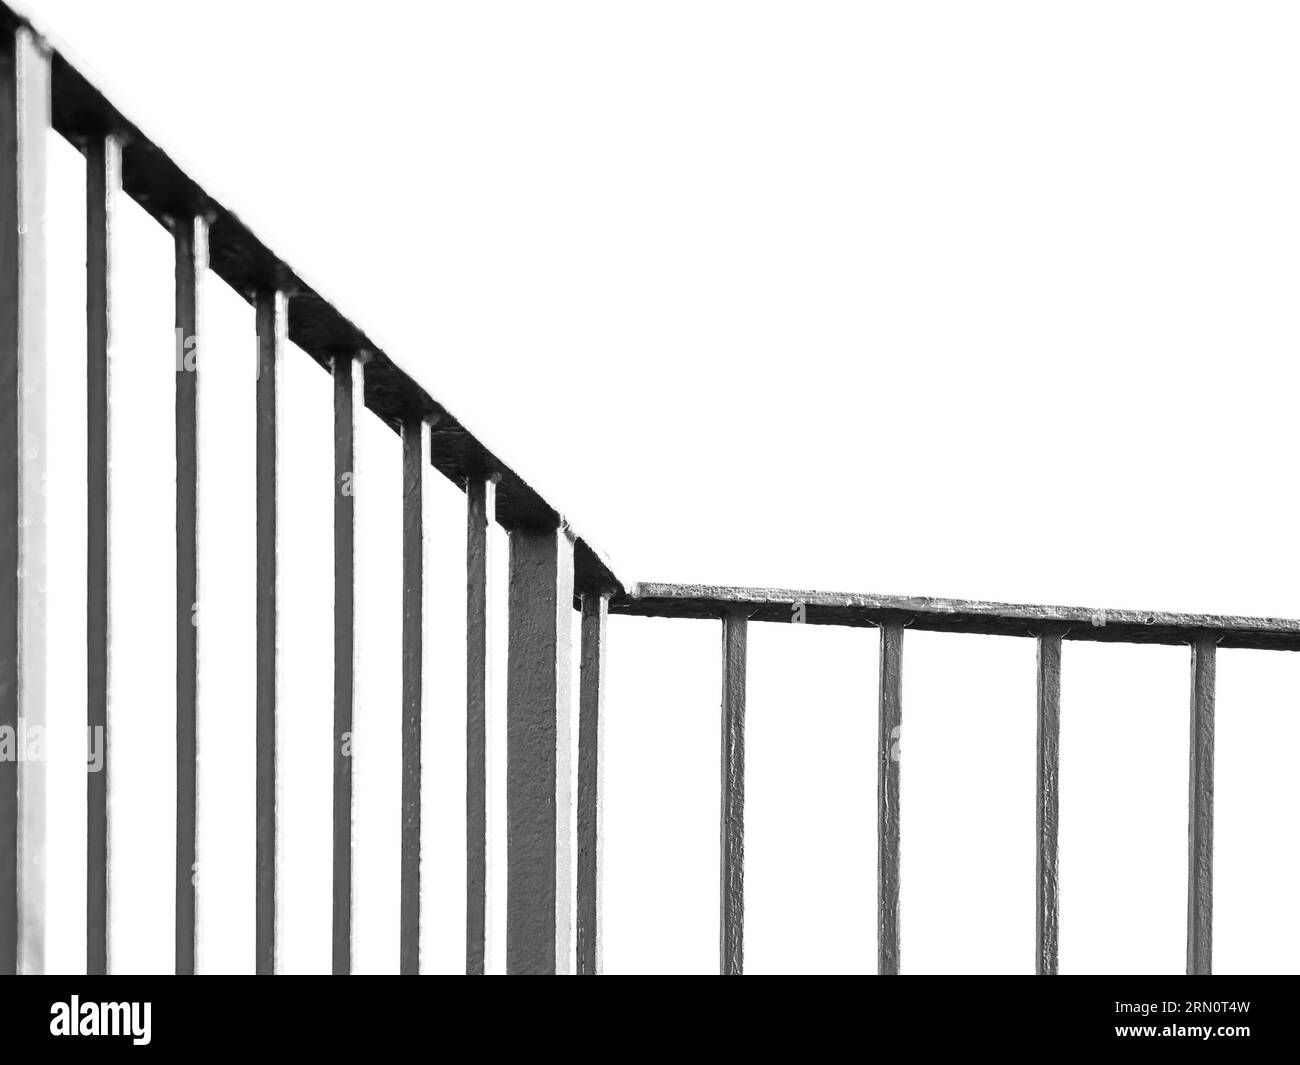 black and white image of railing or handrail isolated on white background as lines, minimalism, decision, fence, safety concept with copy space Stock Photo